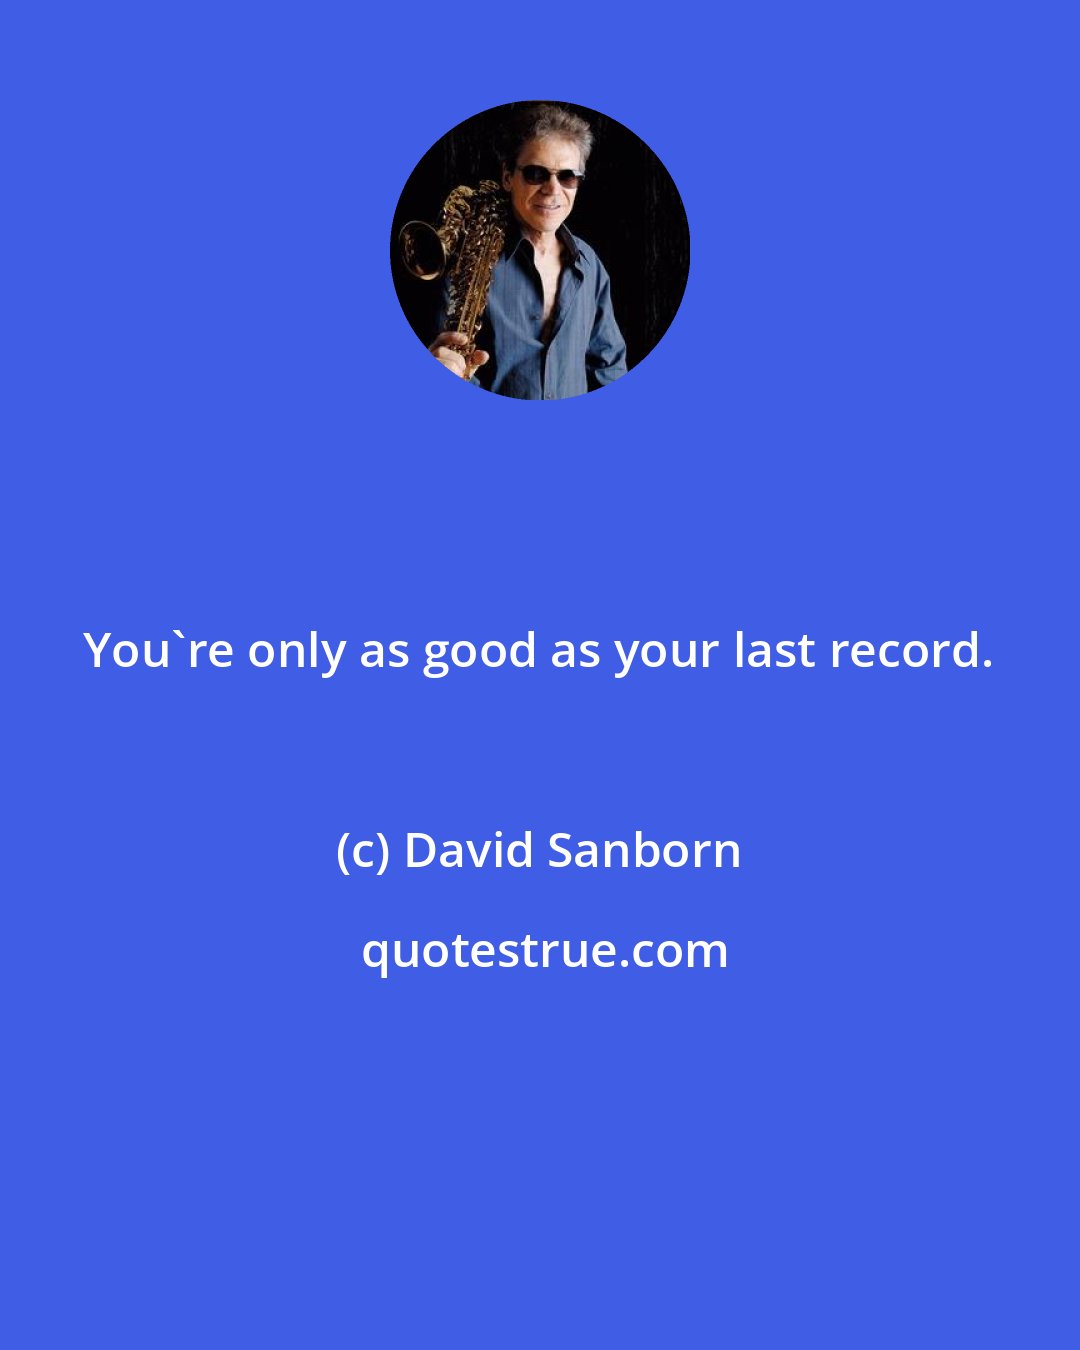 David Sanborn: You're only as good as your last record.